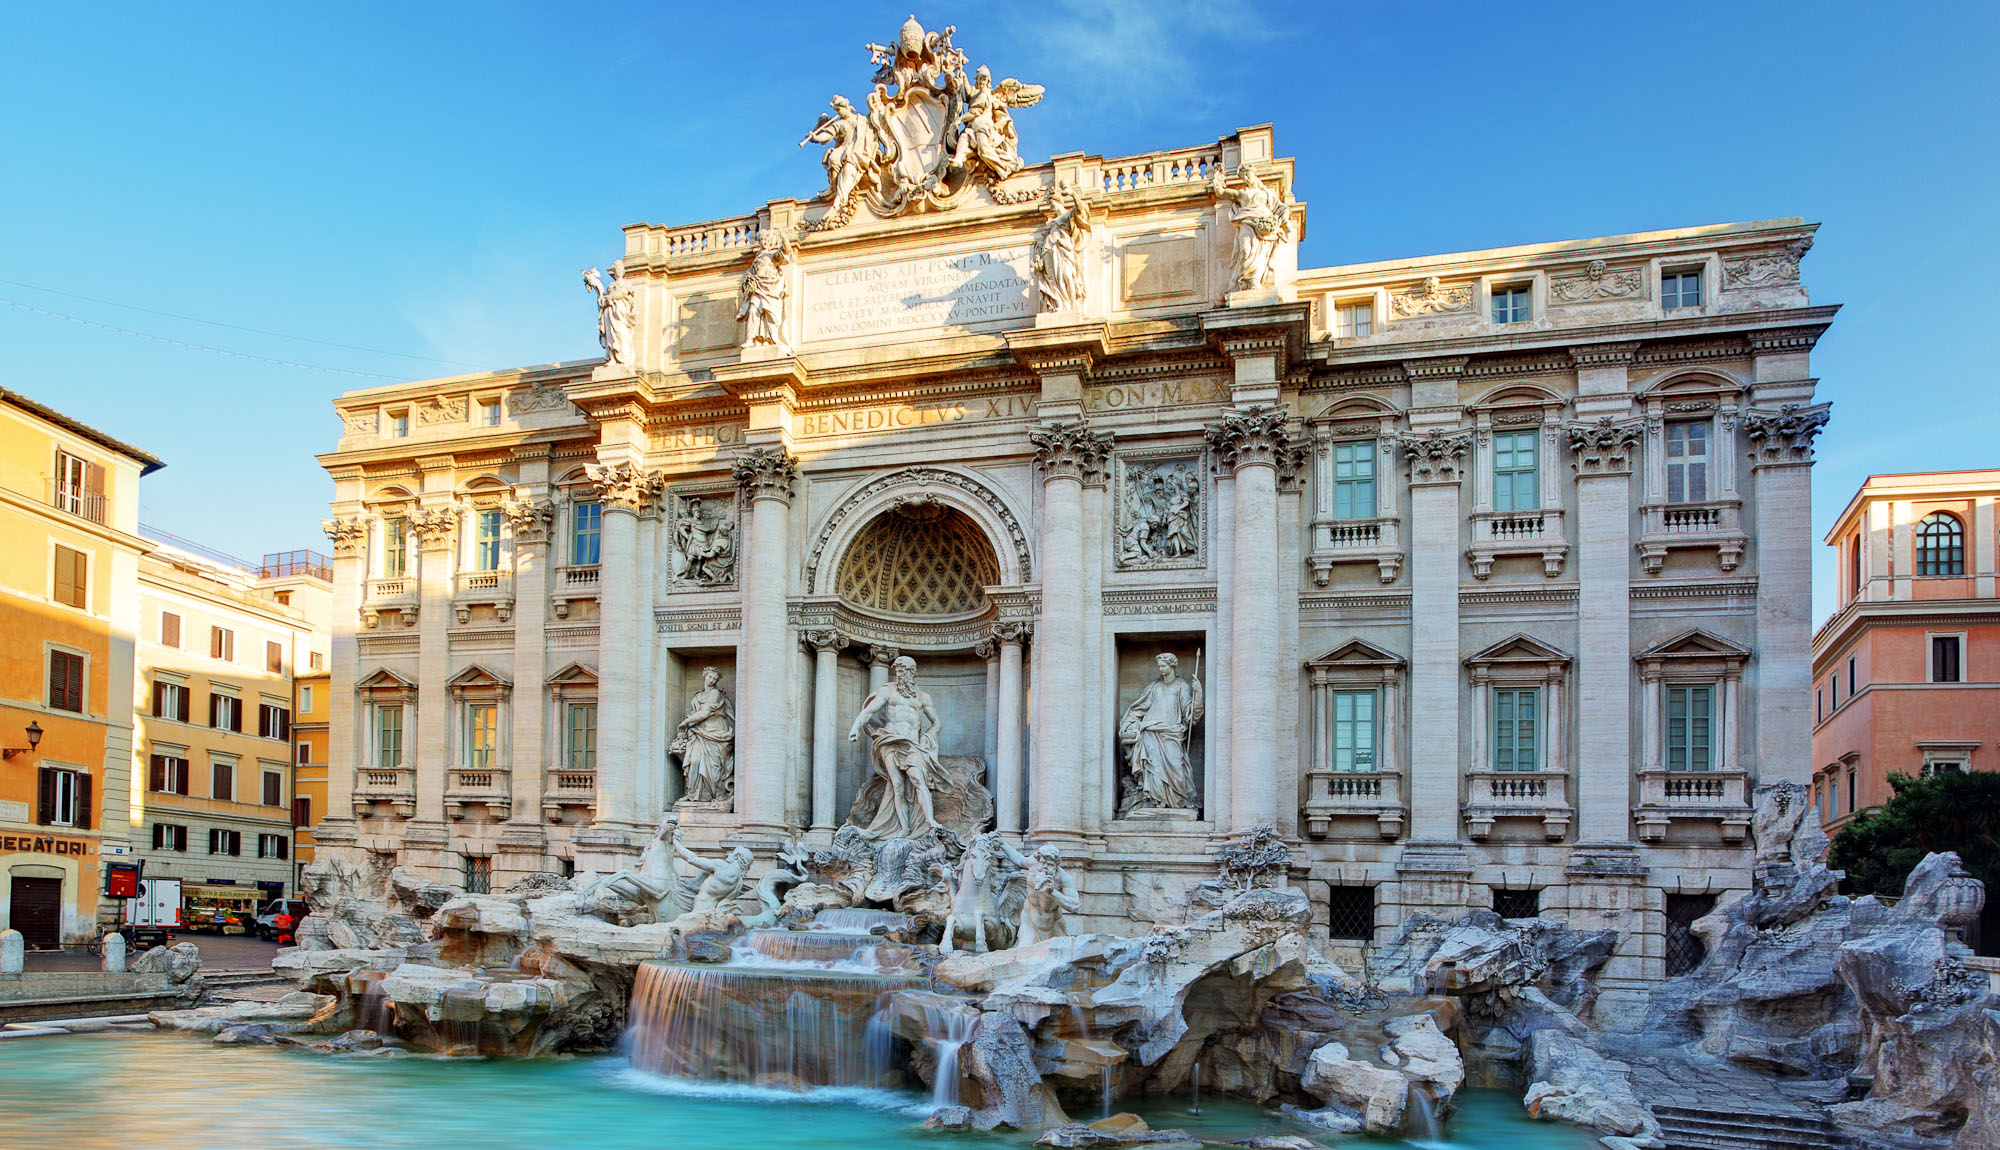 Trevi Fountain Backgrounds, Compatible - PC, Mobile, Gadgets| 2000x1150 px